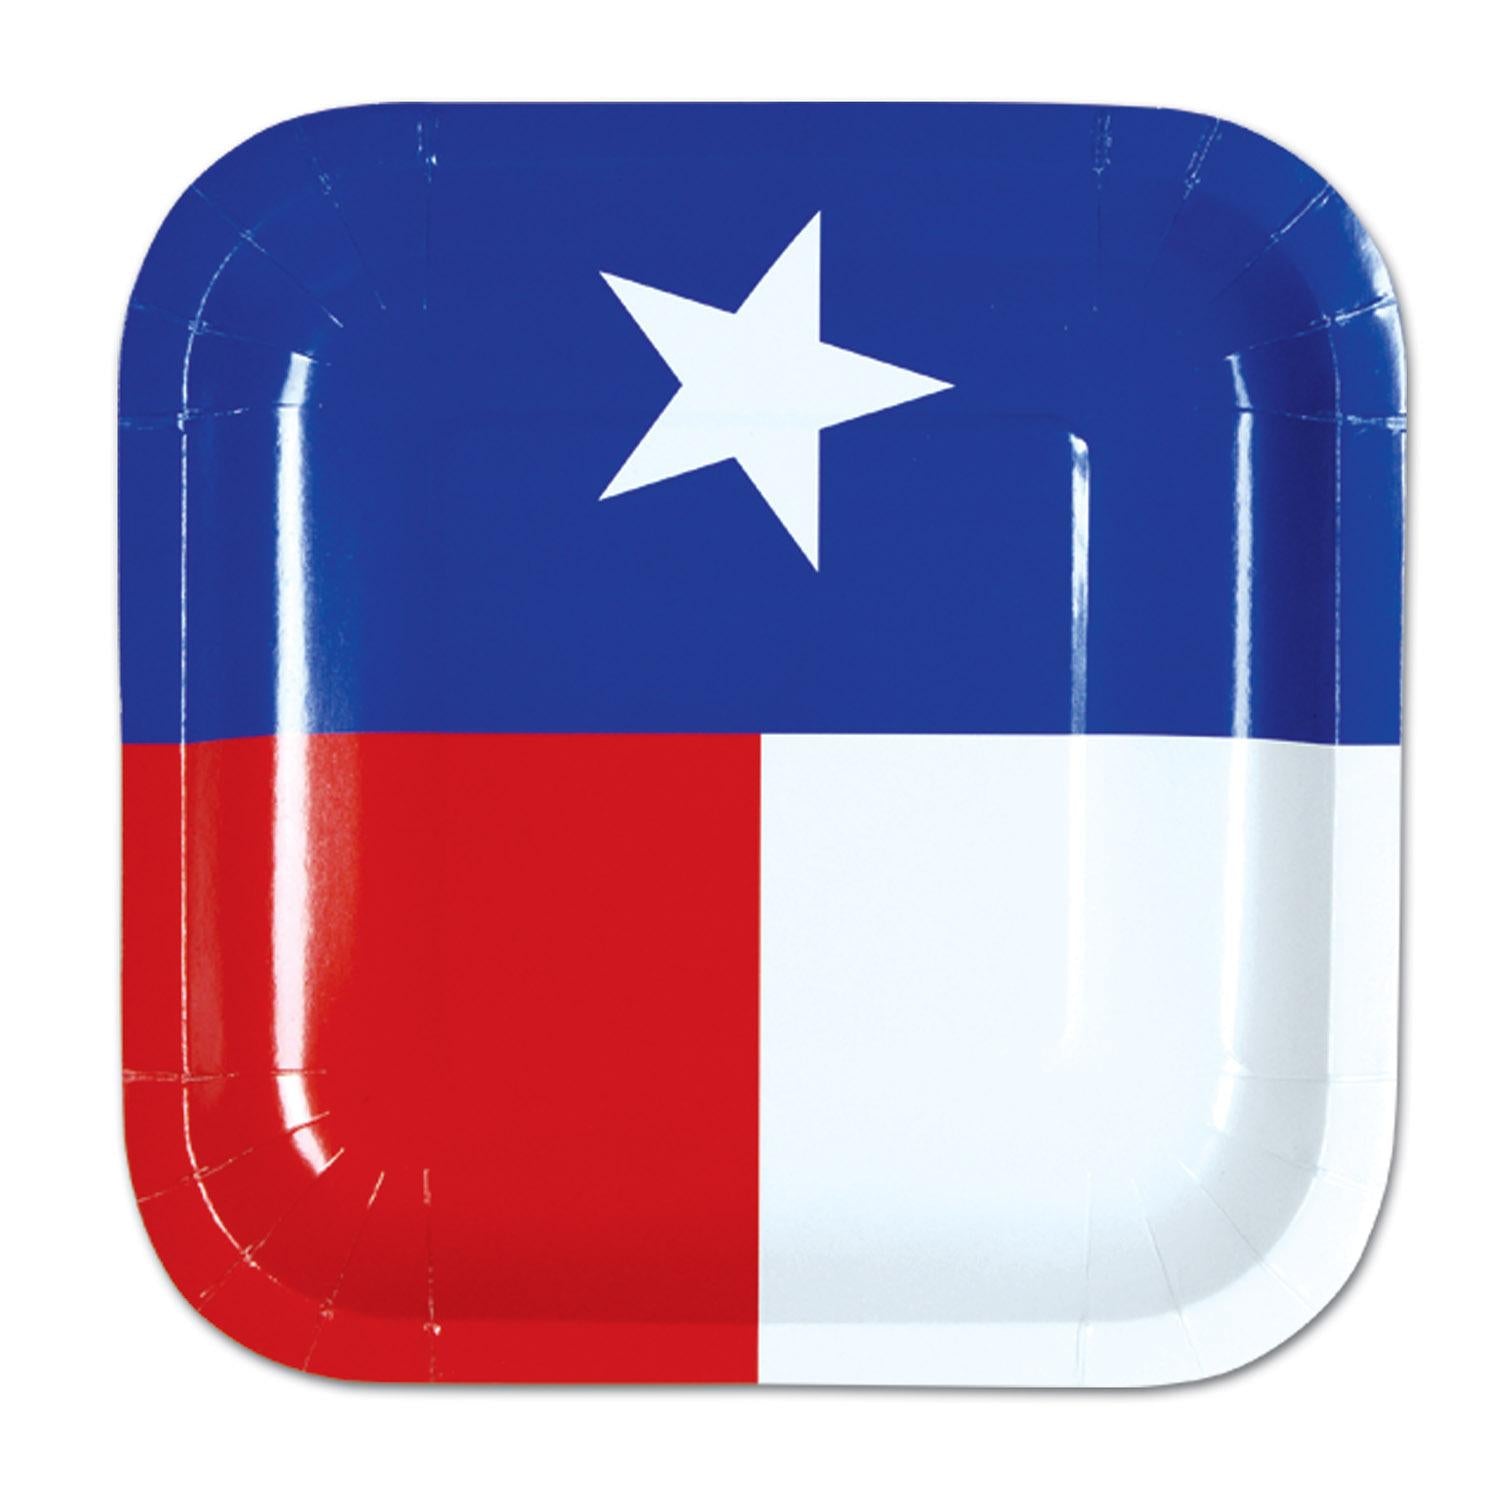 Beistle Texas Themed Party Paper Plates 7 inch, 8/Pkg